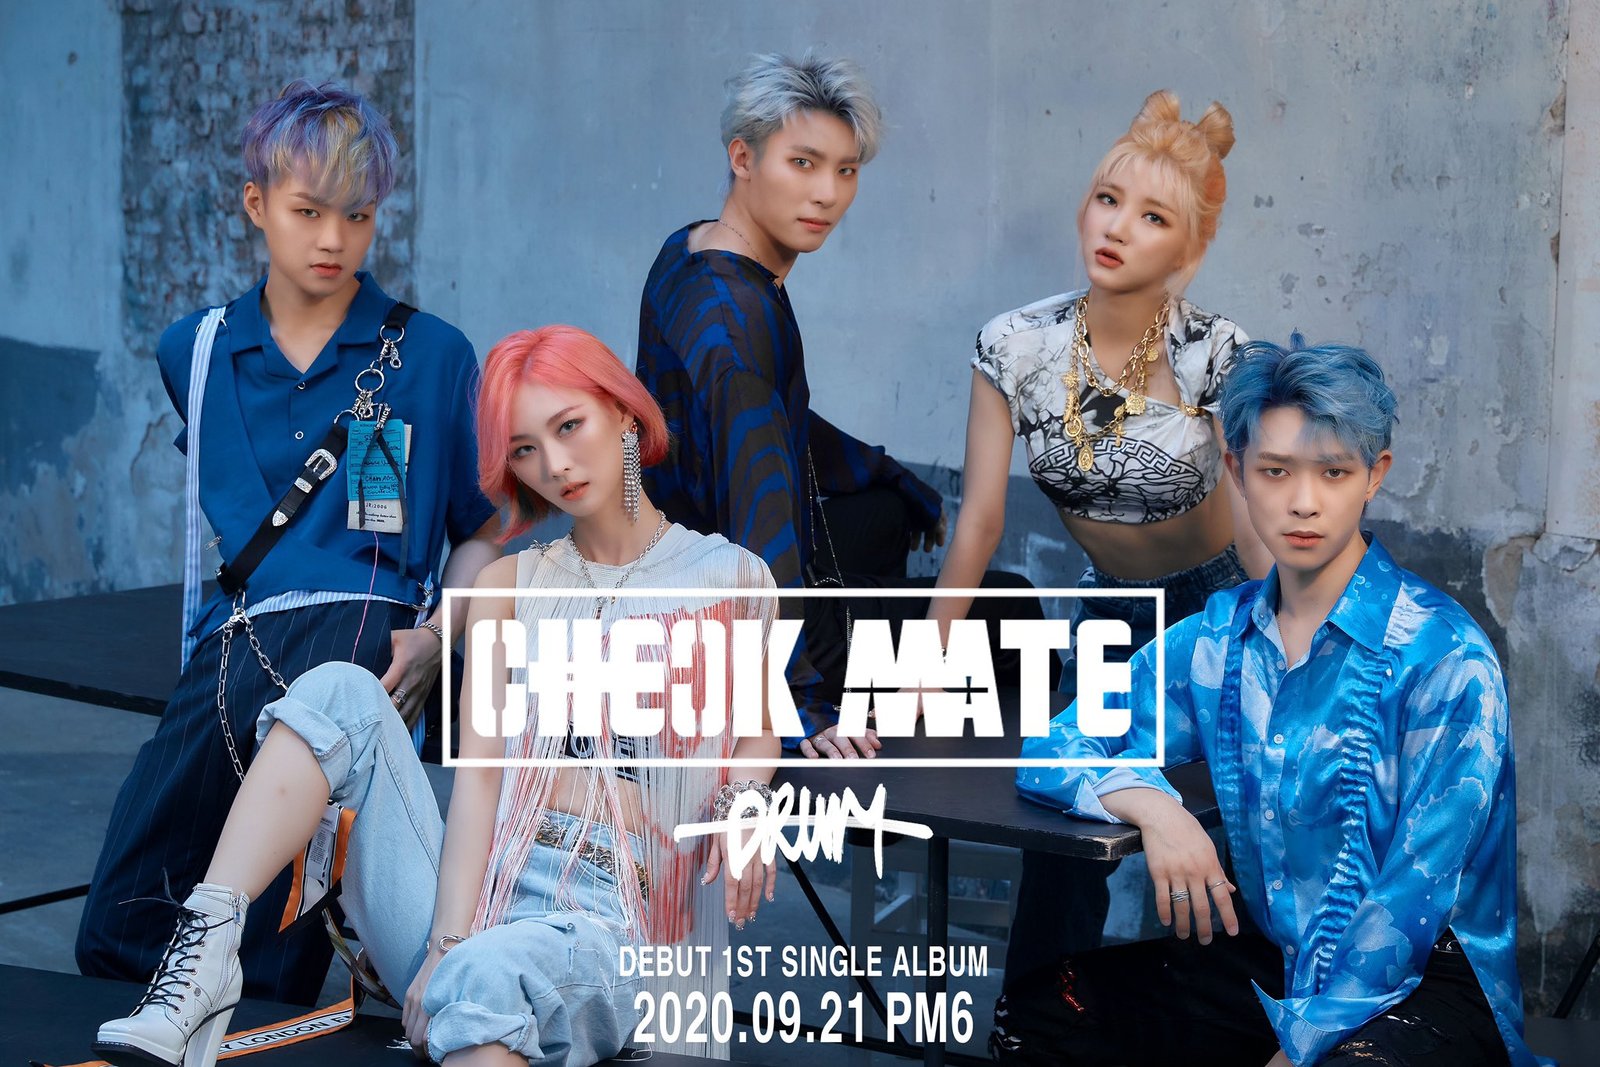 Newly debuting co-ed group Checkmate shares first set of concept